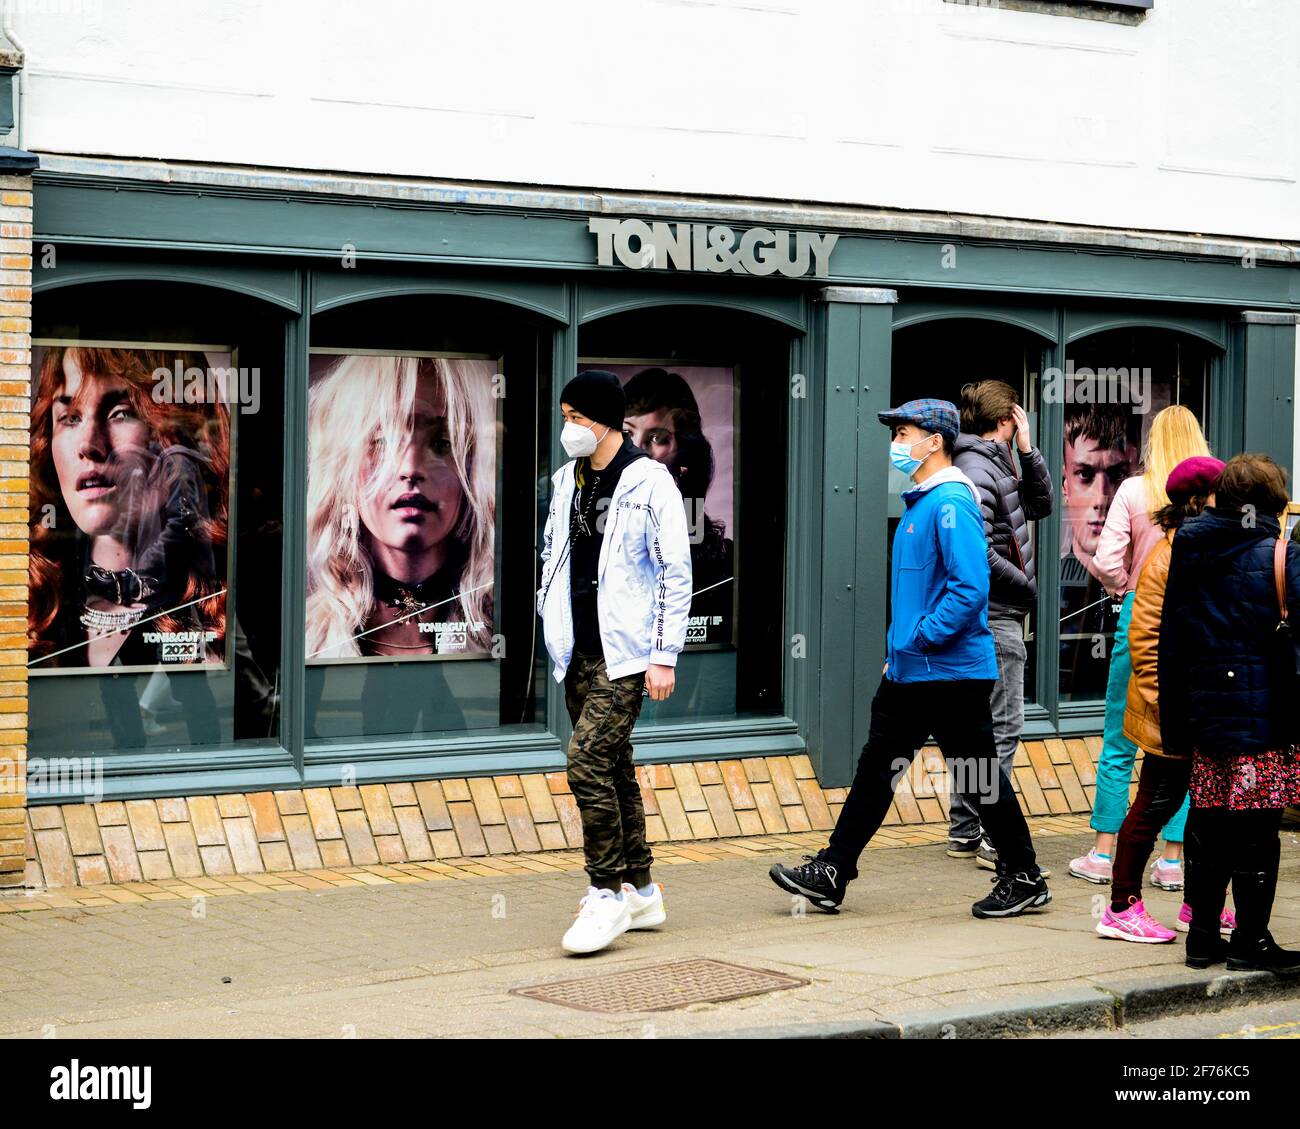 Cambridge, UK, England, 03-04-2021. Adults wearing face coverings  walk pastBuilding exterior of Toni and Guy Hair Stylists. Stock Photo